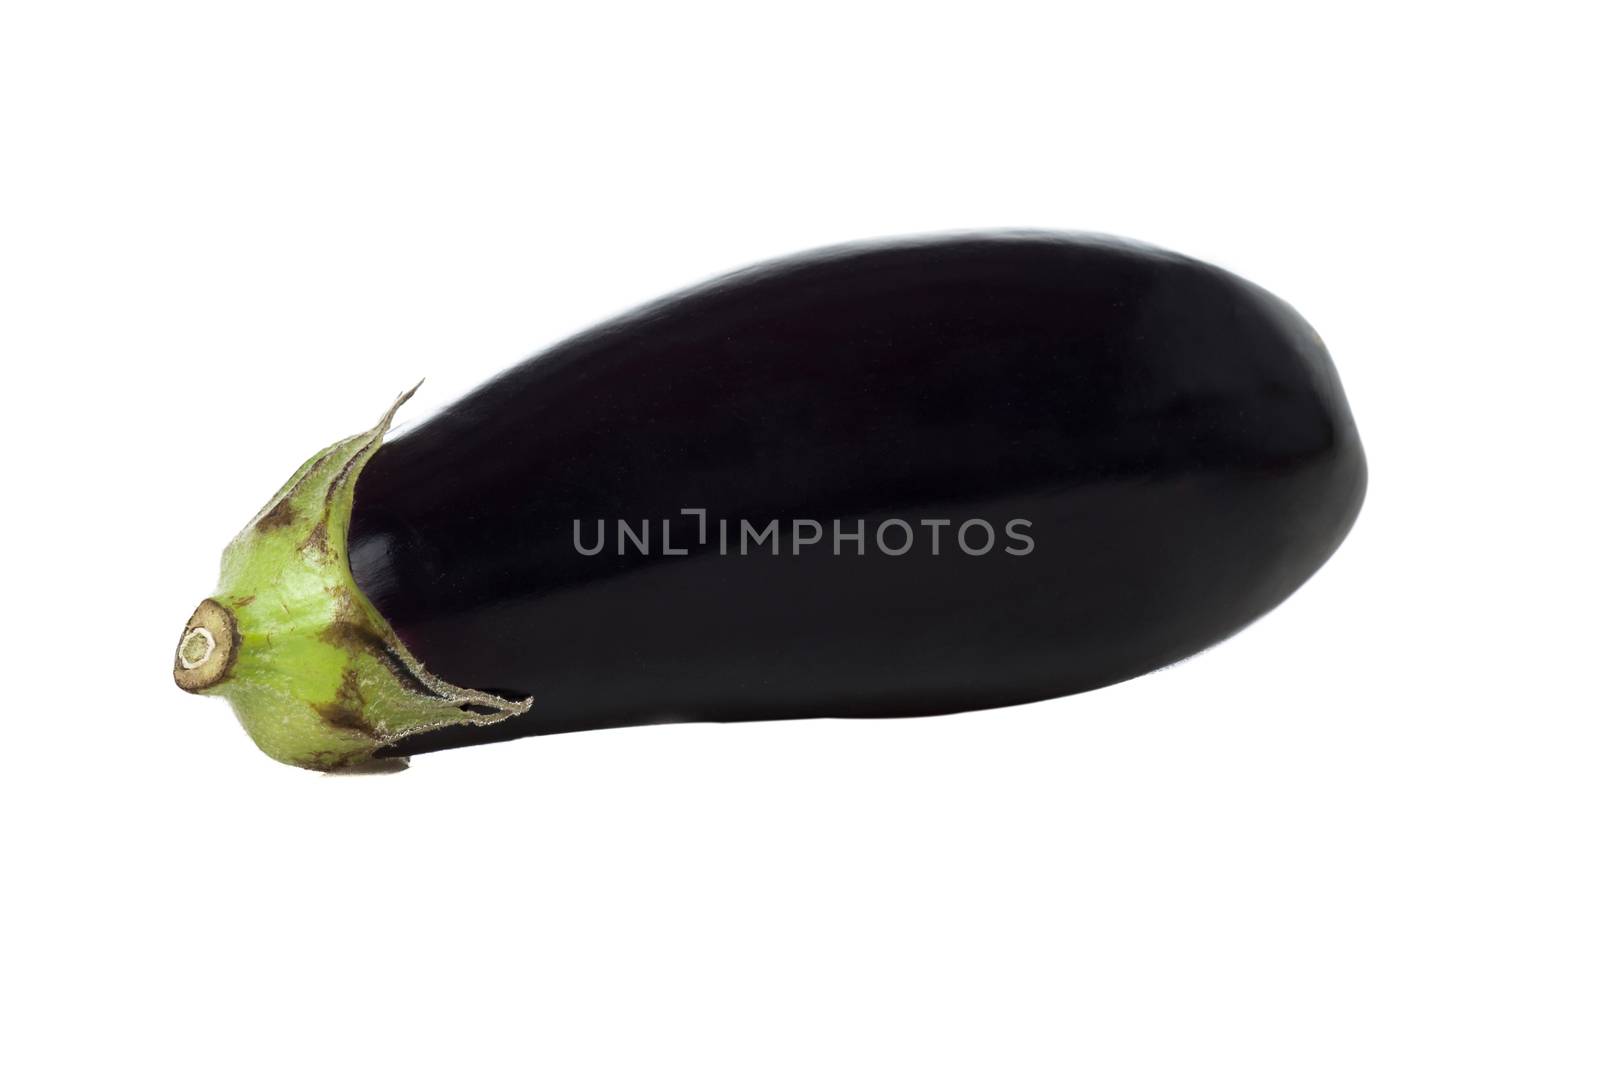 Eggplant or Aubergine vegetable by stockyimages